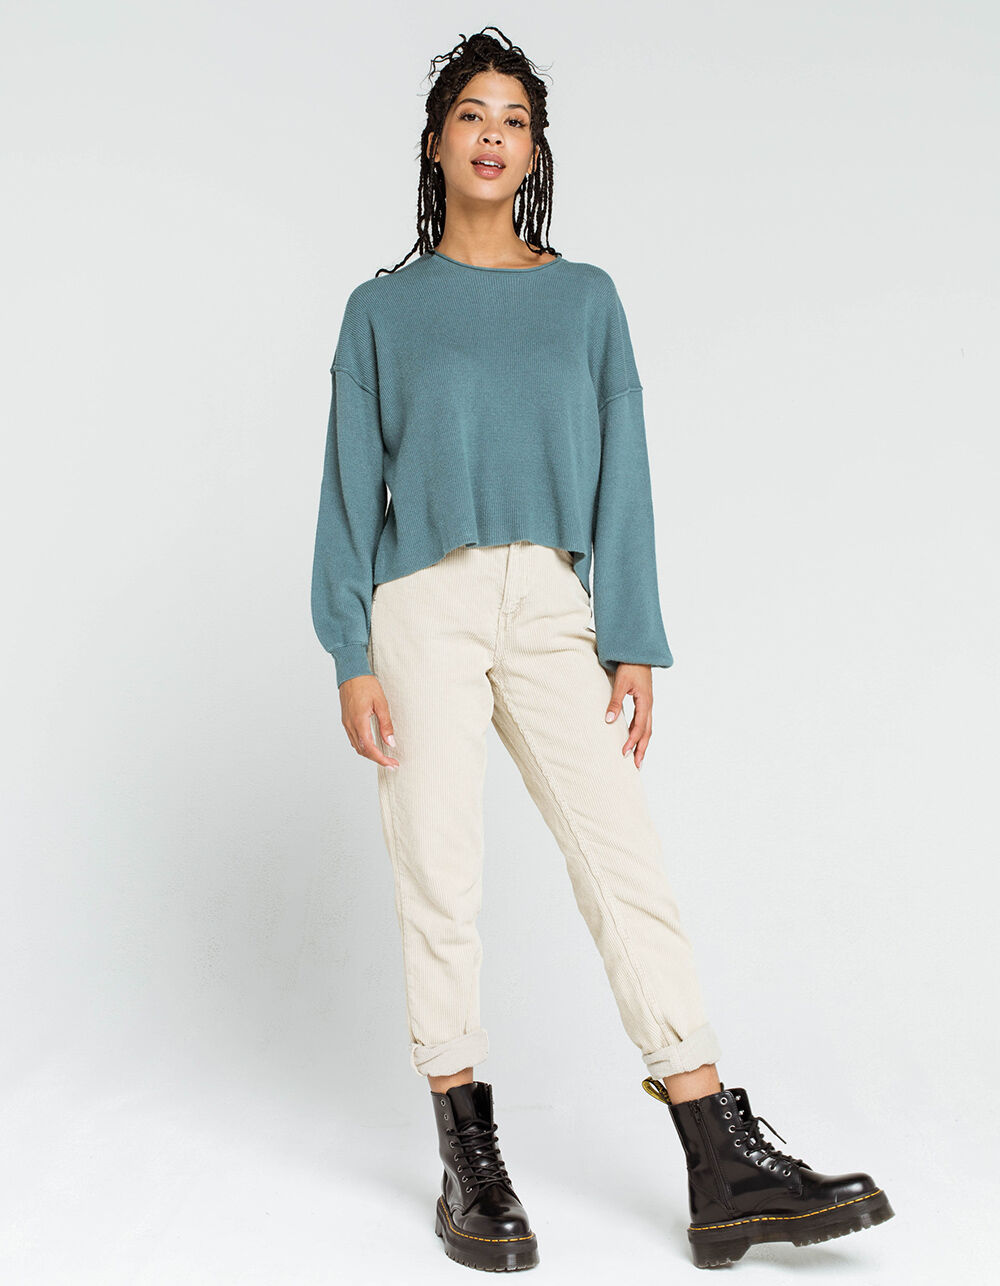 SKY AND SPARROW Rib Balloon Sleeve Womens Green Sweater - GREEN | Tillys